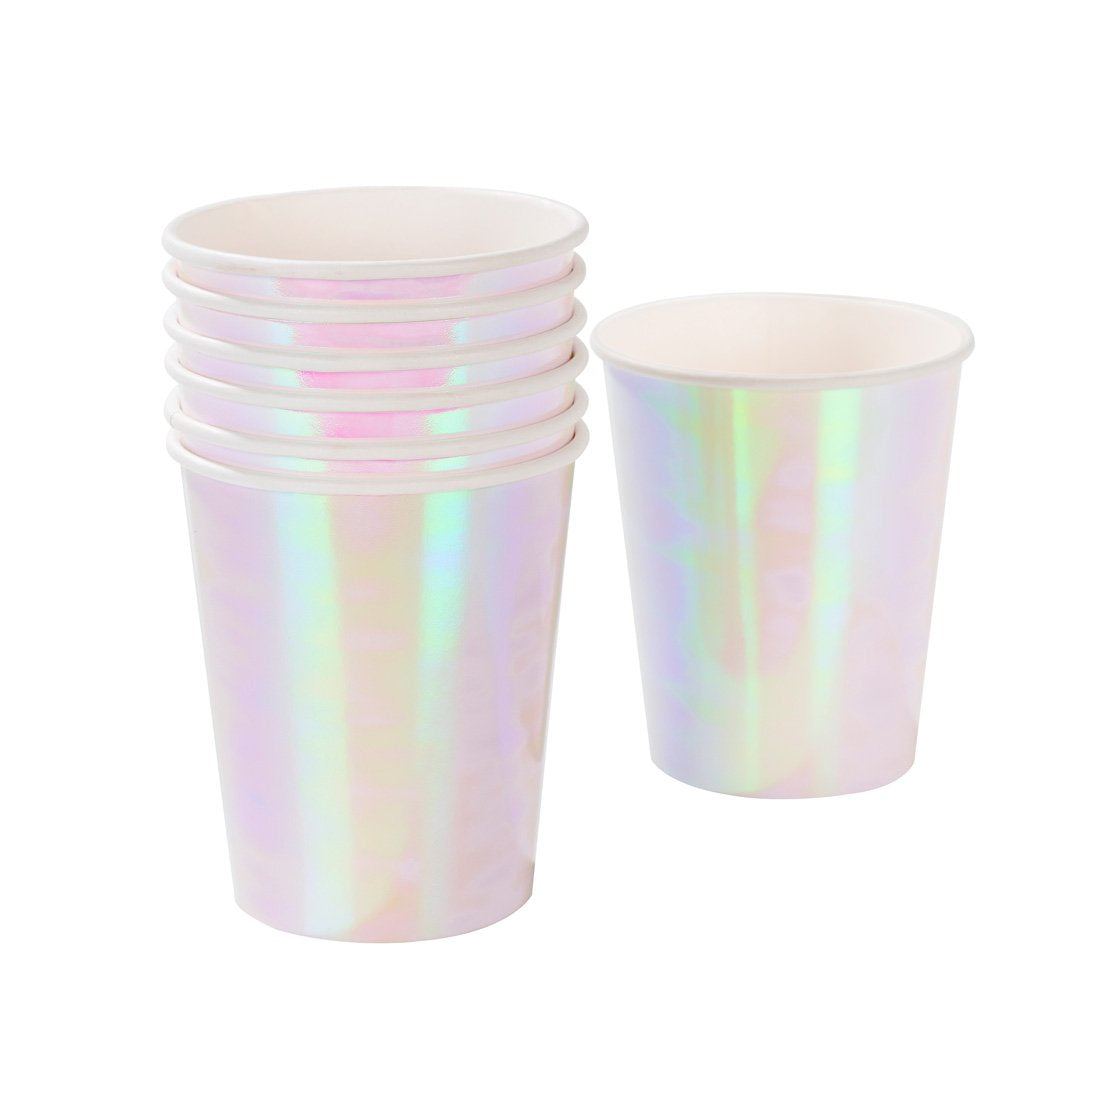 Iridescent Paper Cup - Pack of 12 - Oh Happy Fry - we ship worldwide